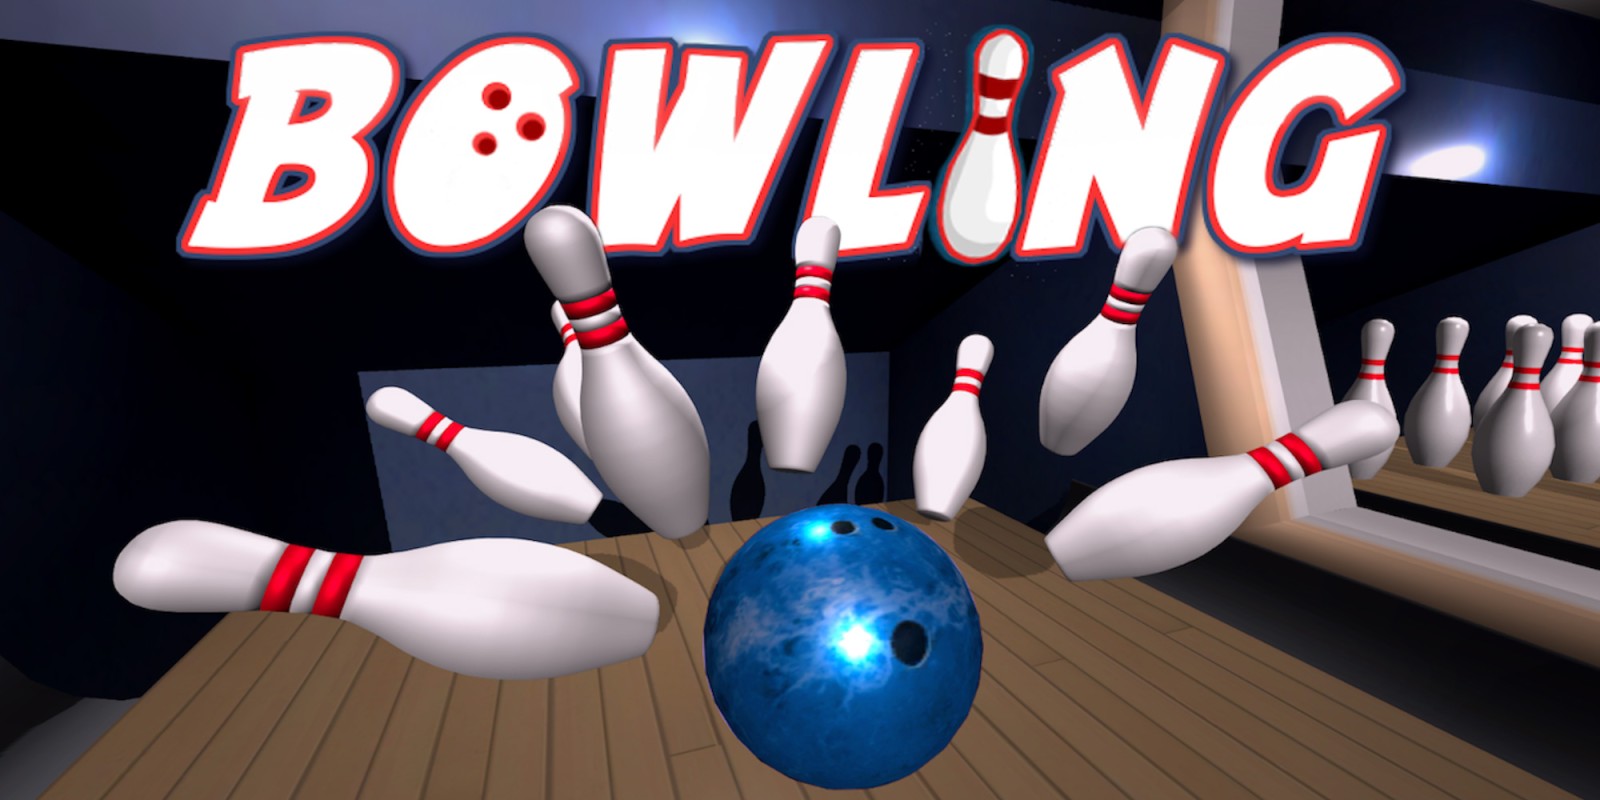 How to find the best bowling alley?